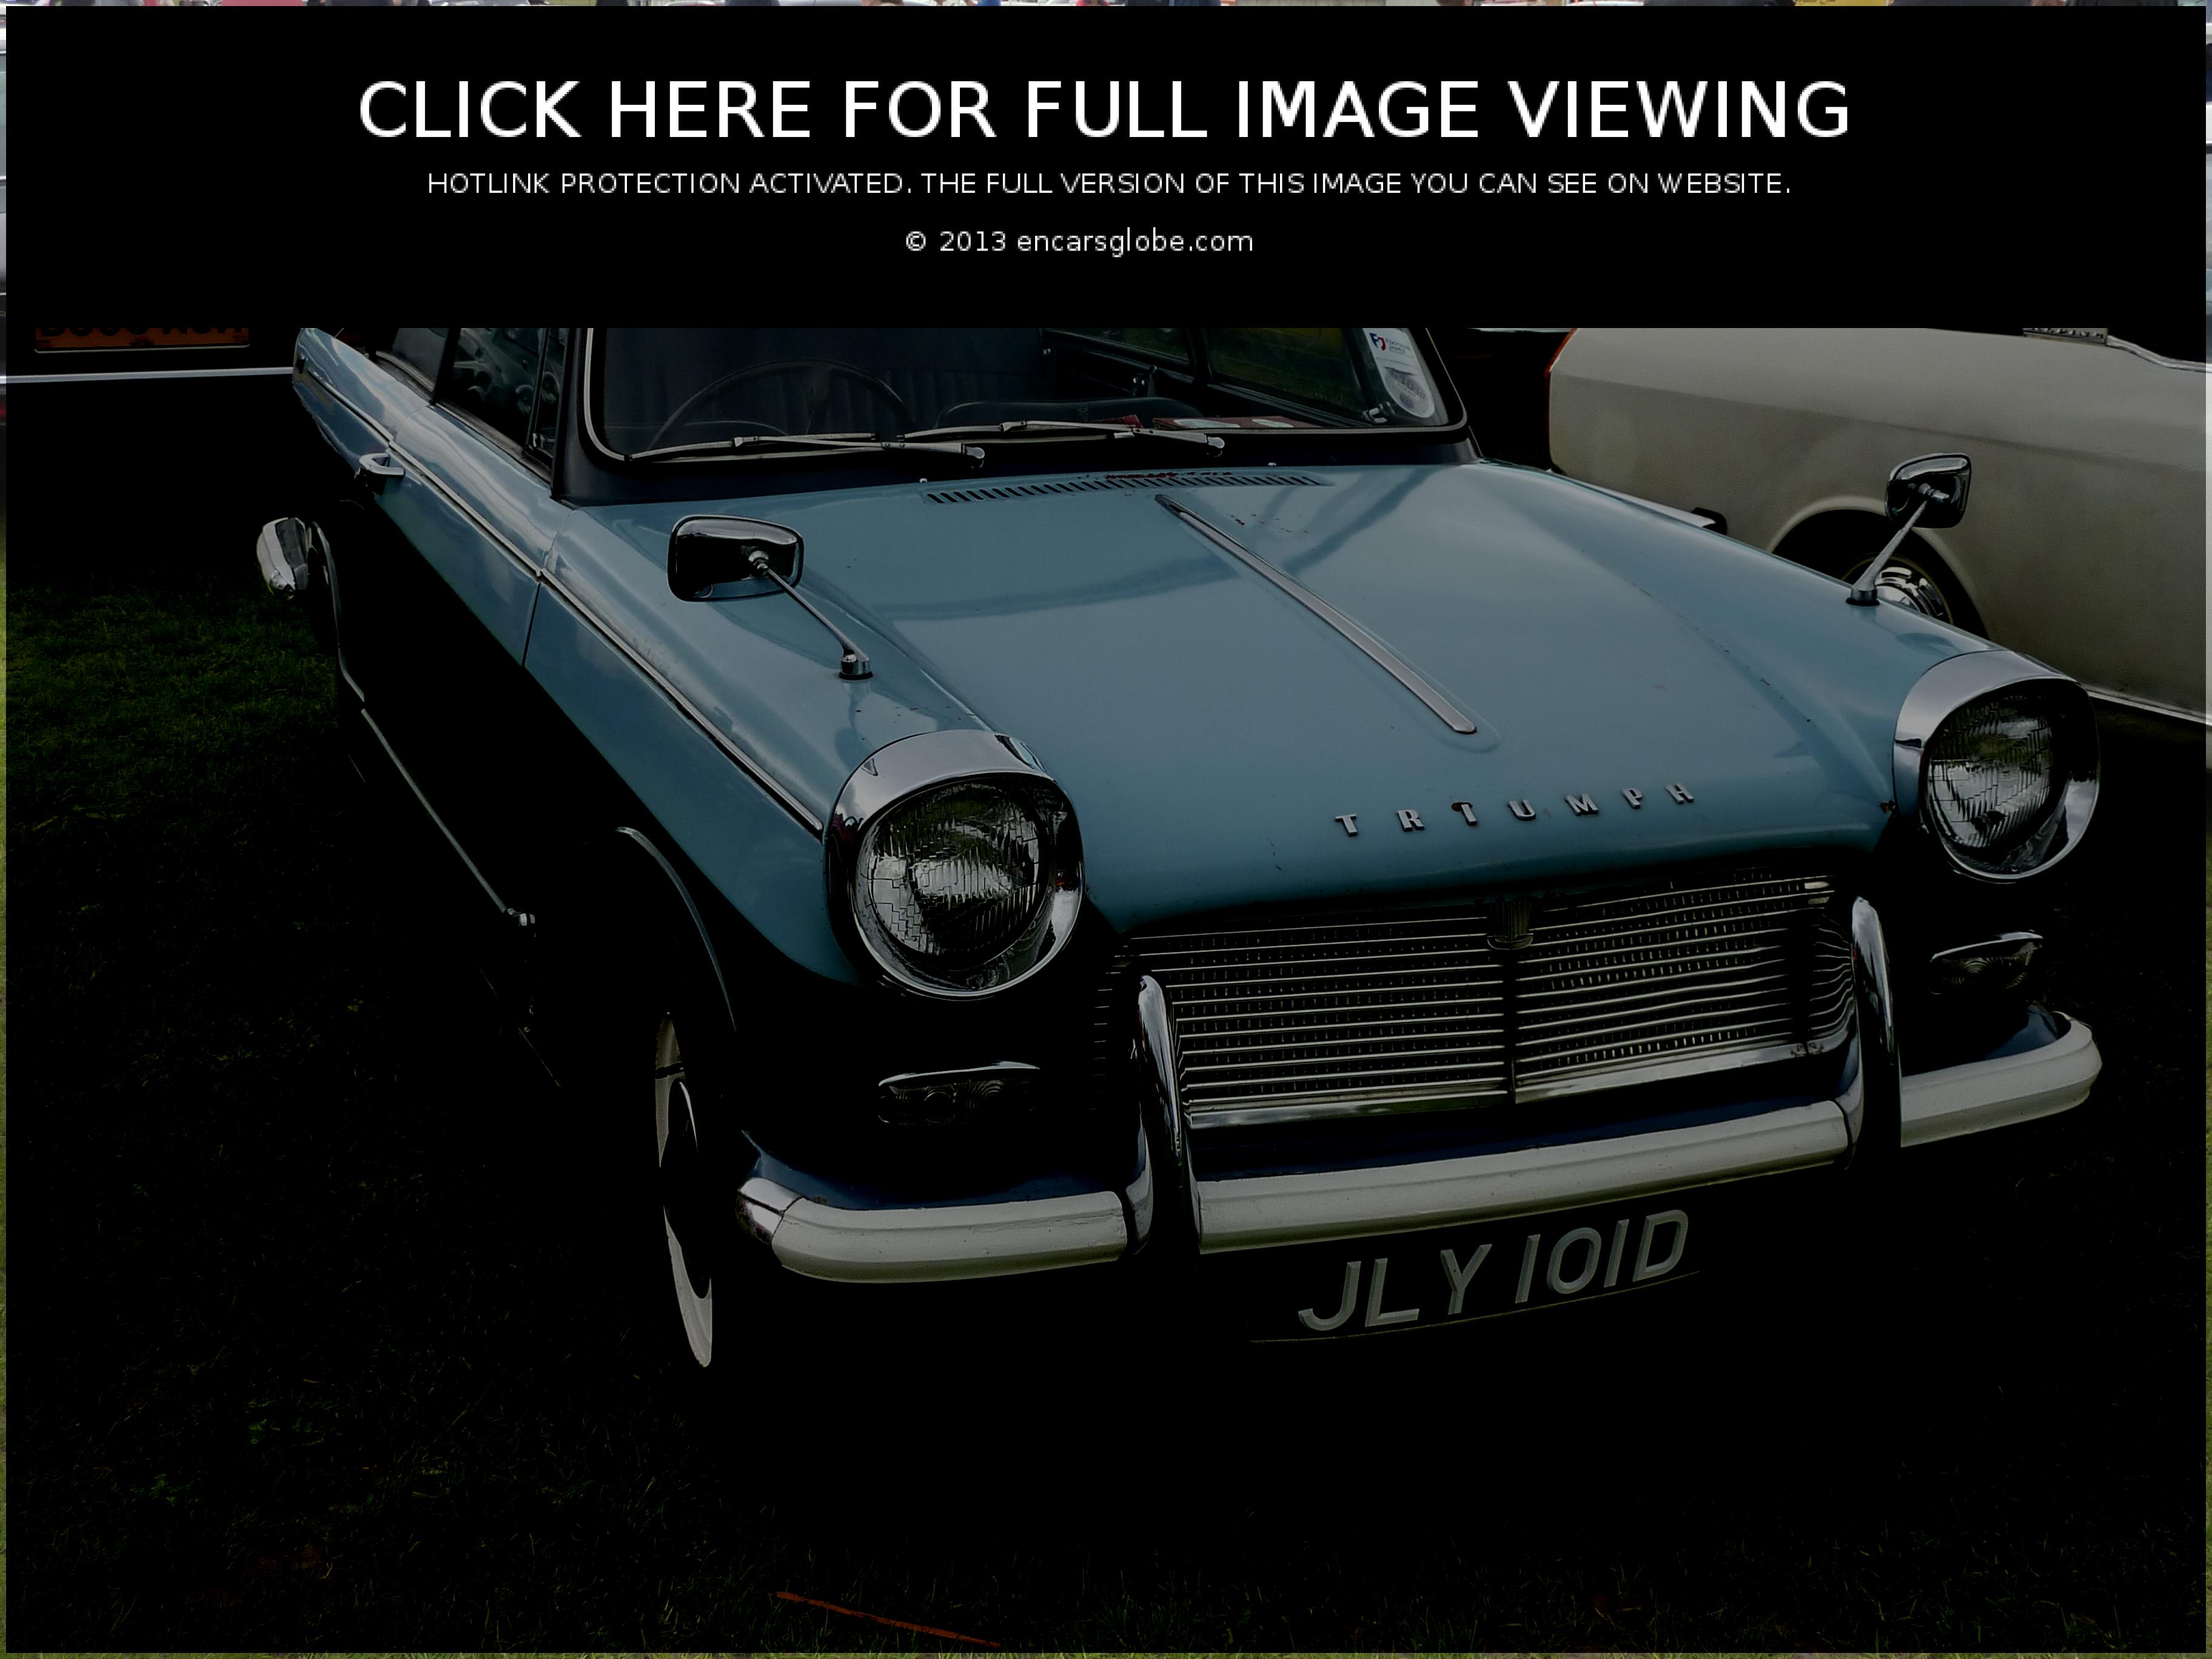 Triumph Herald 1250 Photo Gallery: Photo #09 out of 7, Image Size ...